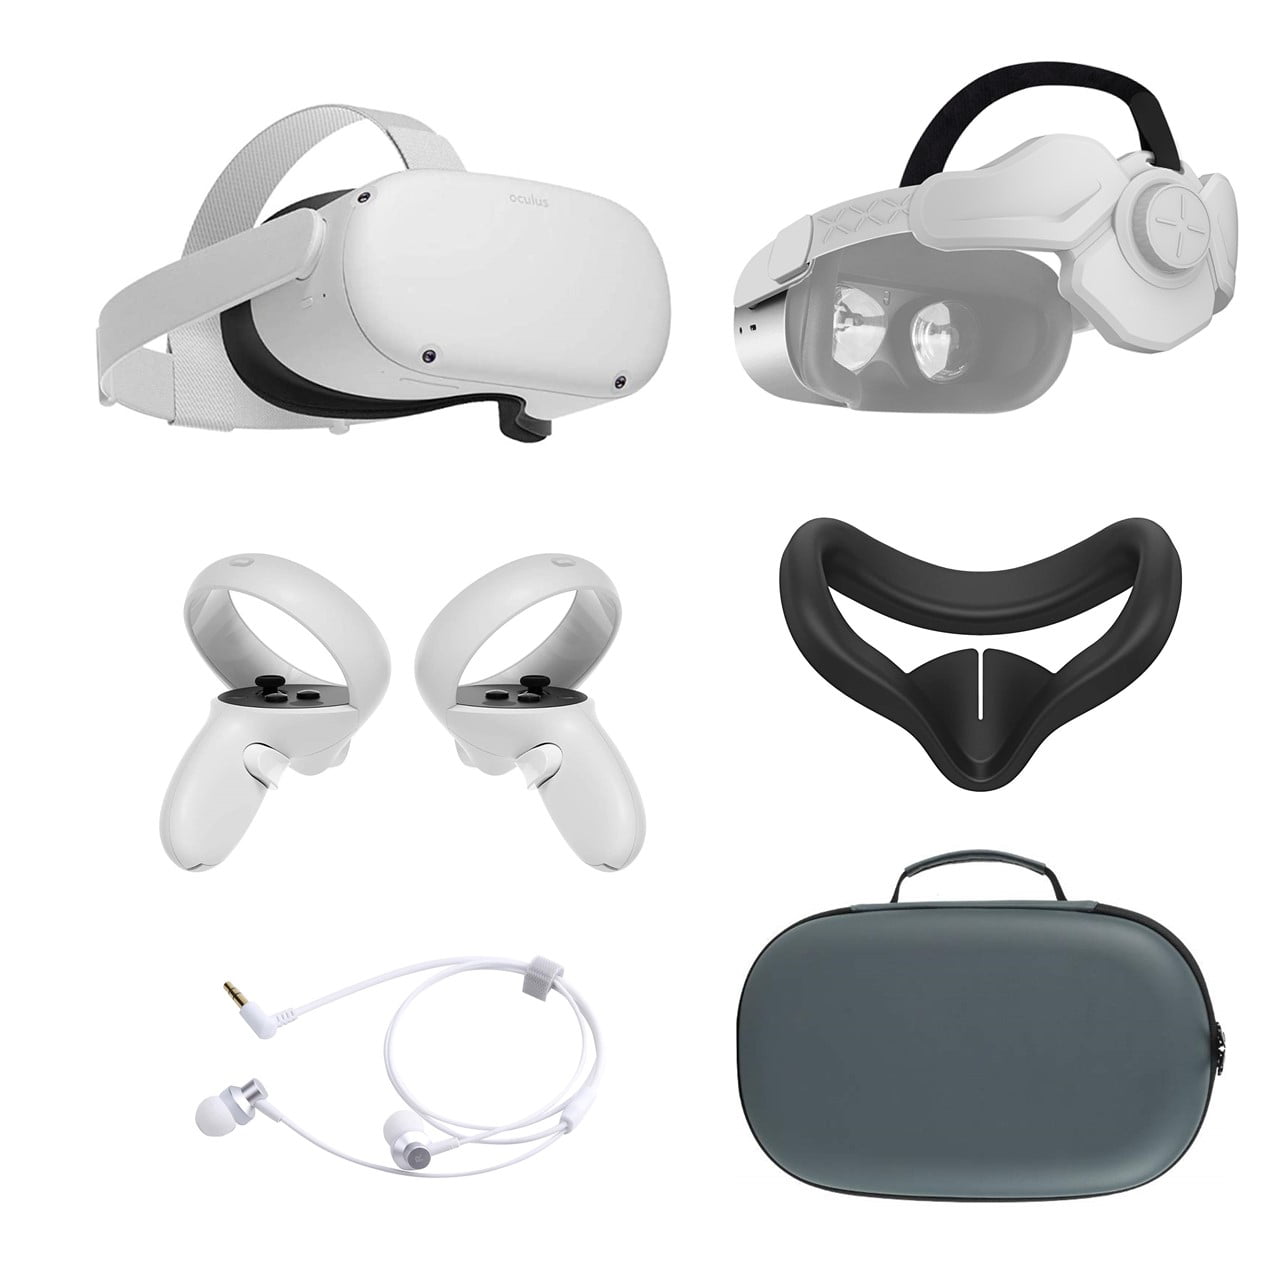 2021 Meta Oculus Quest 2 All-In-One VR Headset, Touch Controllers 